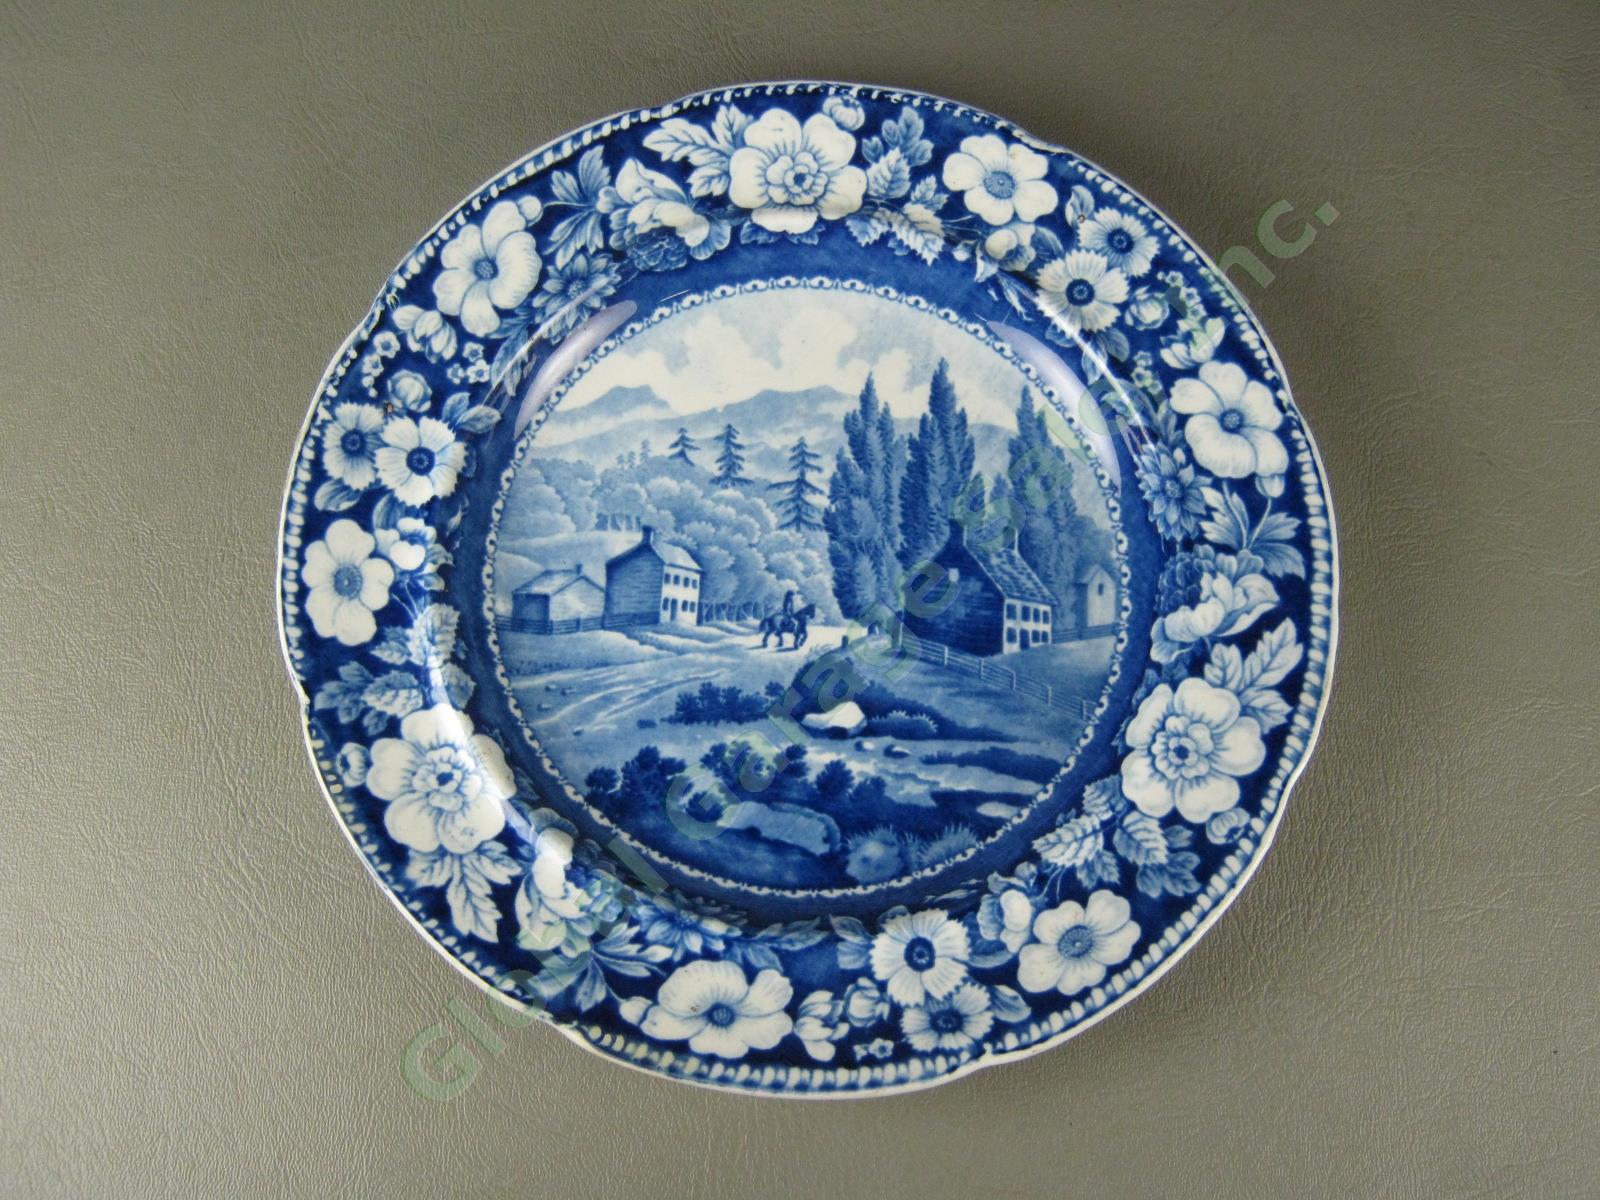 Antique 1820s A Stevenson Historical Staffordshire Plate Road To Lake George